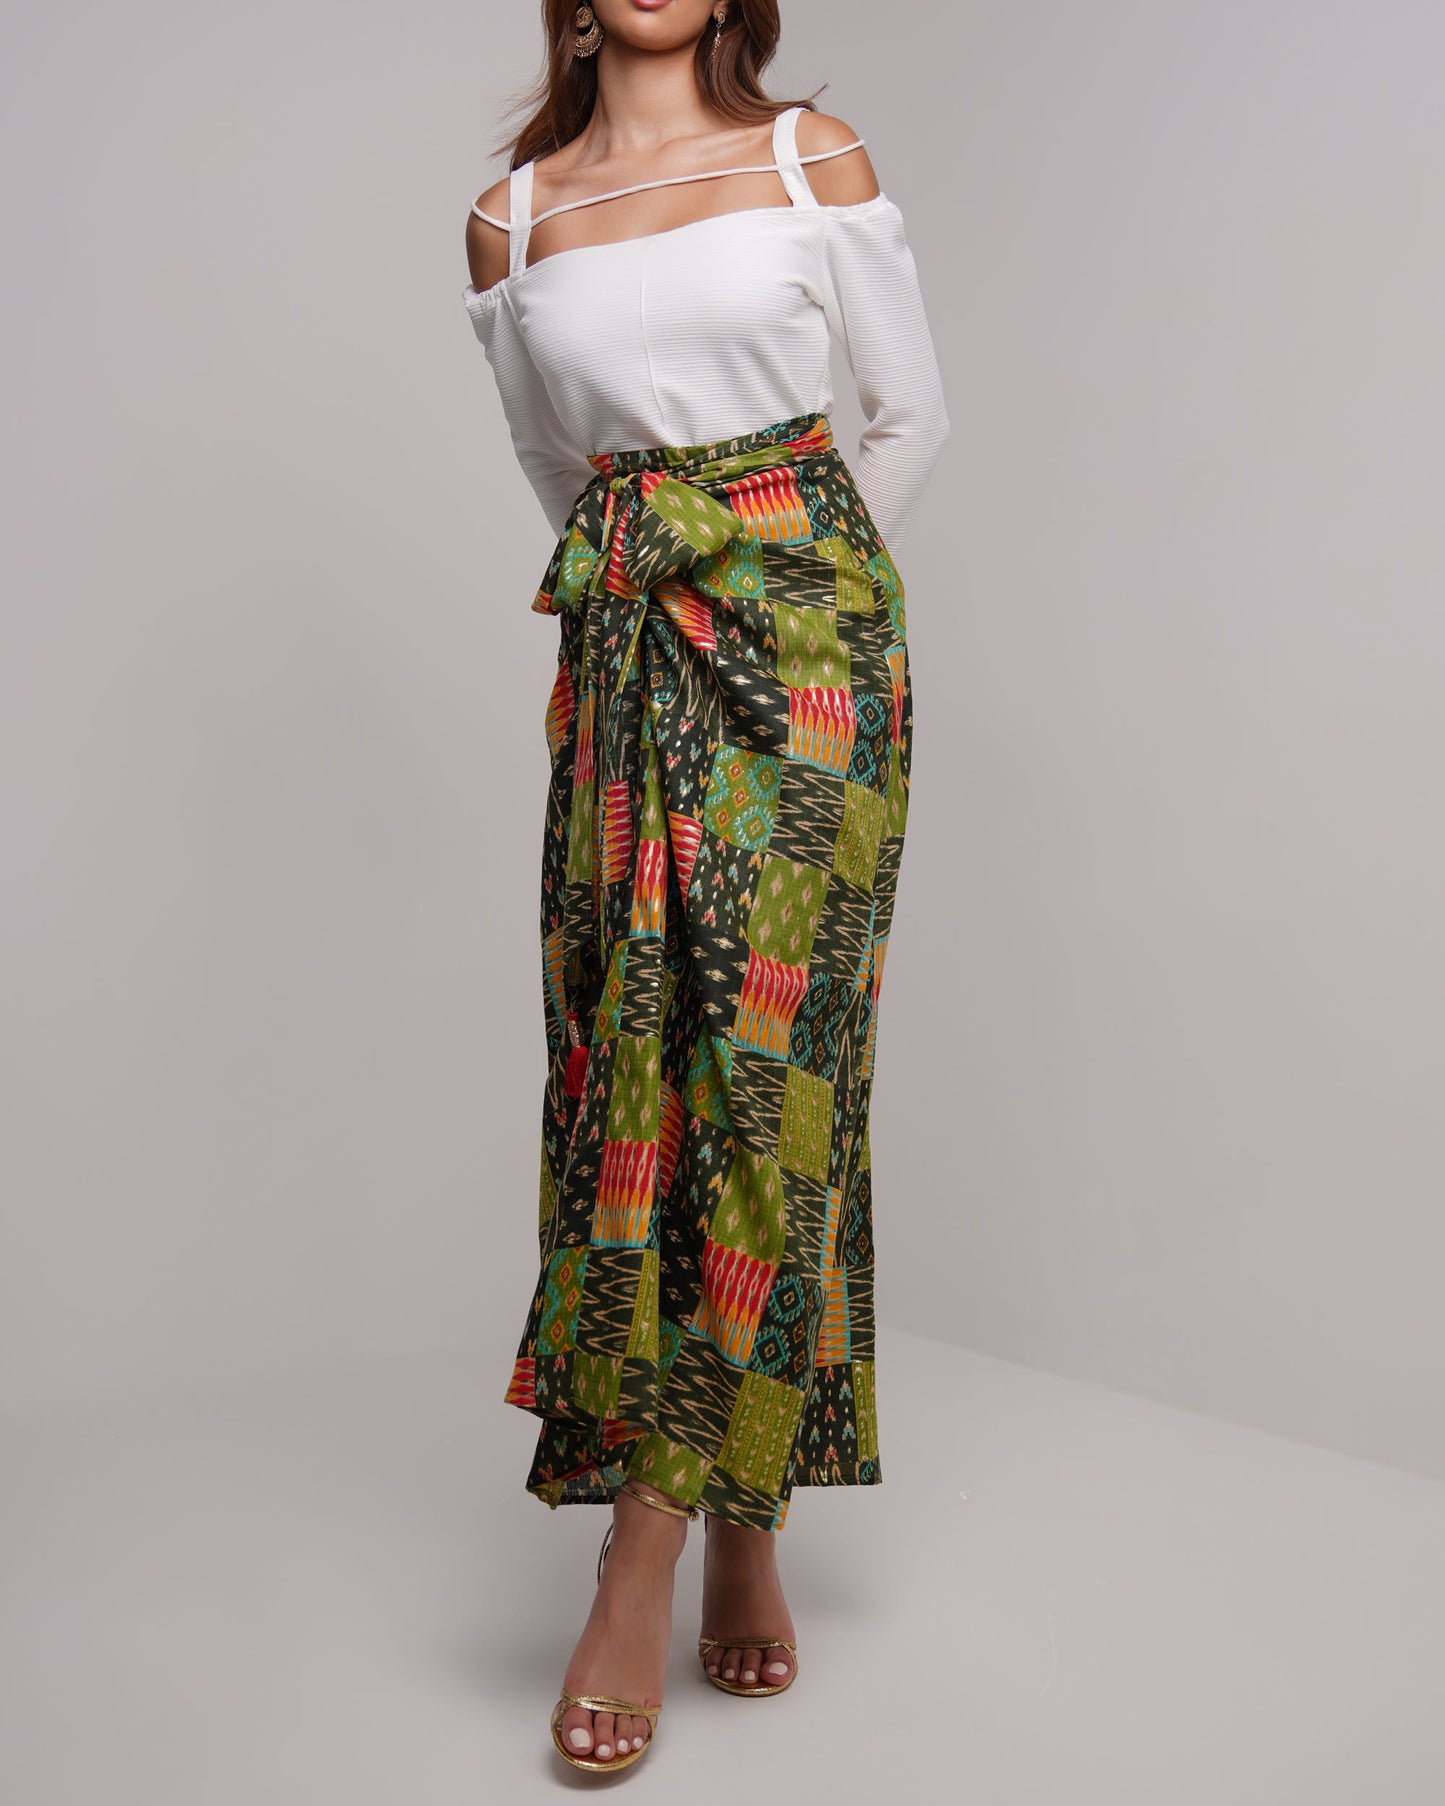 Forest green wrap skirt and off white top set